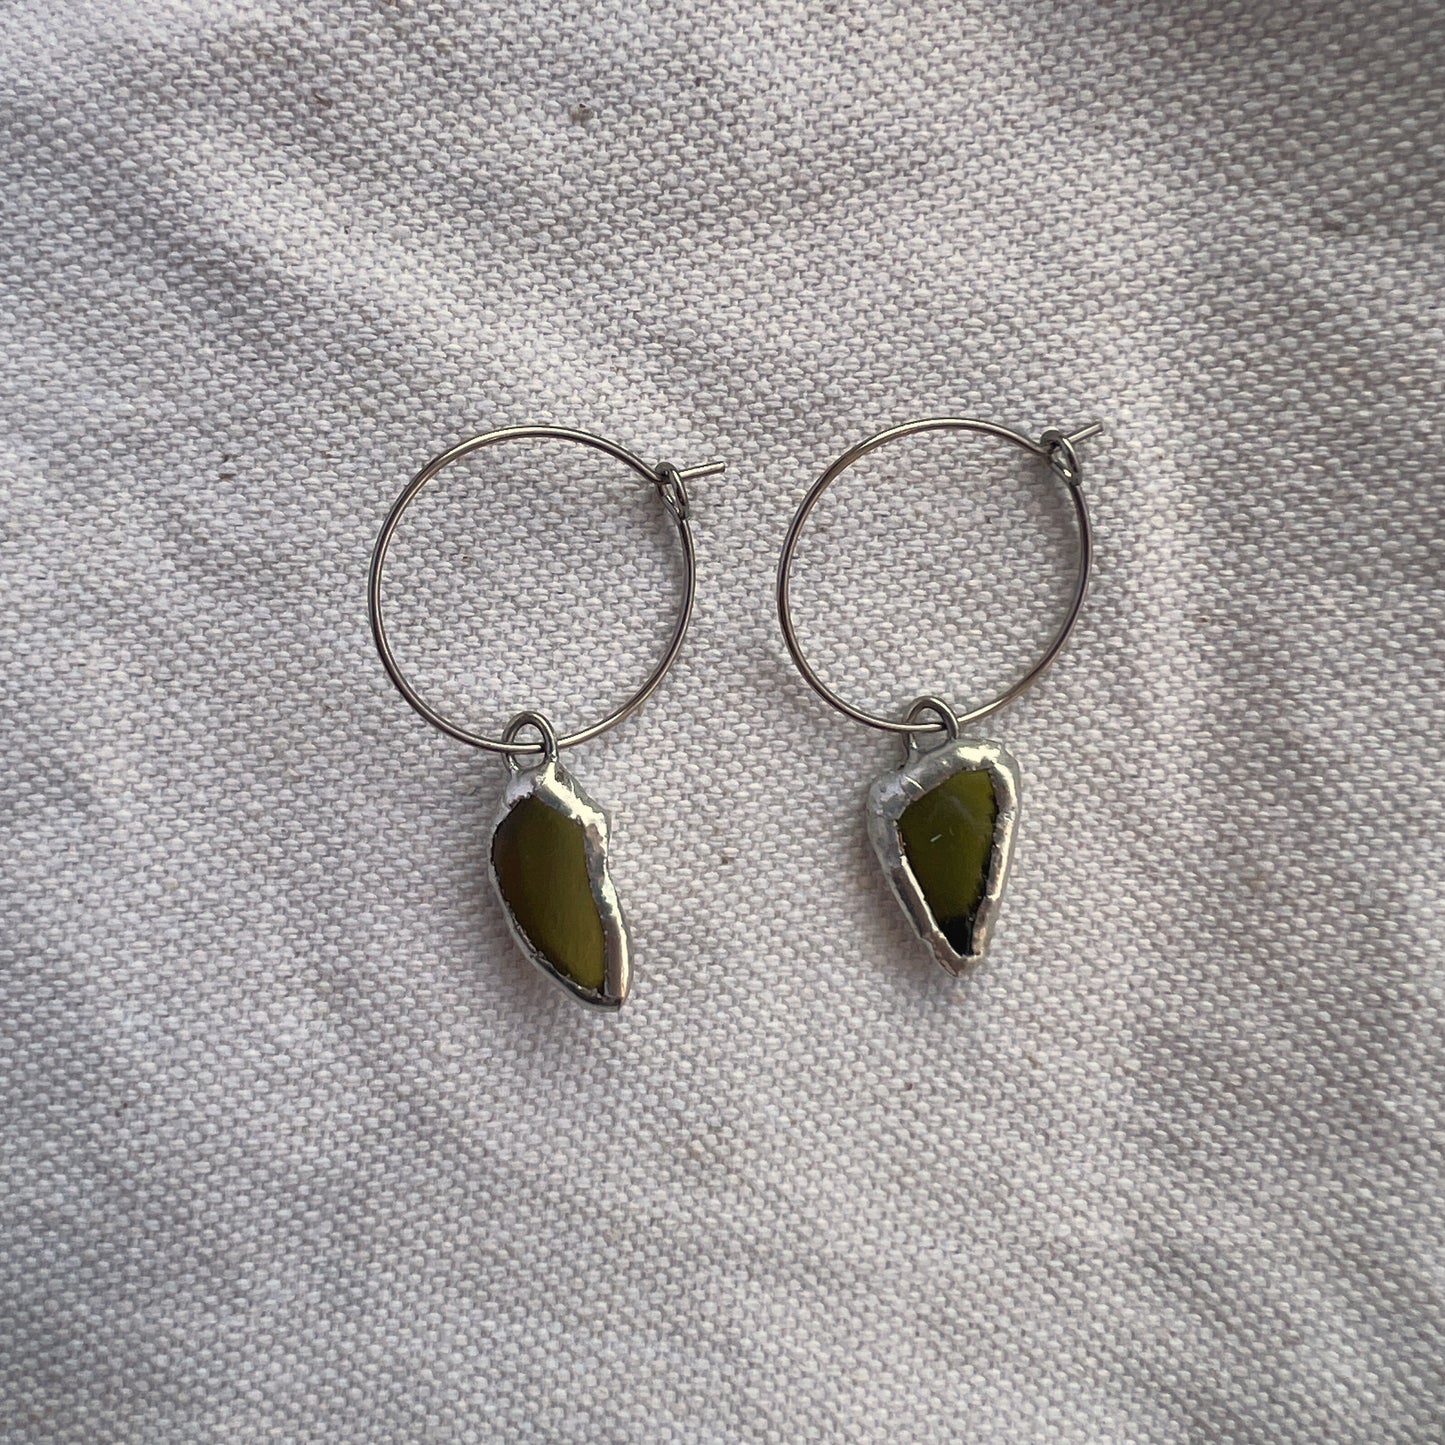 Chicago Beach Glass Earrings (Soldered Olive Green Hoops)